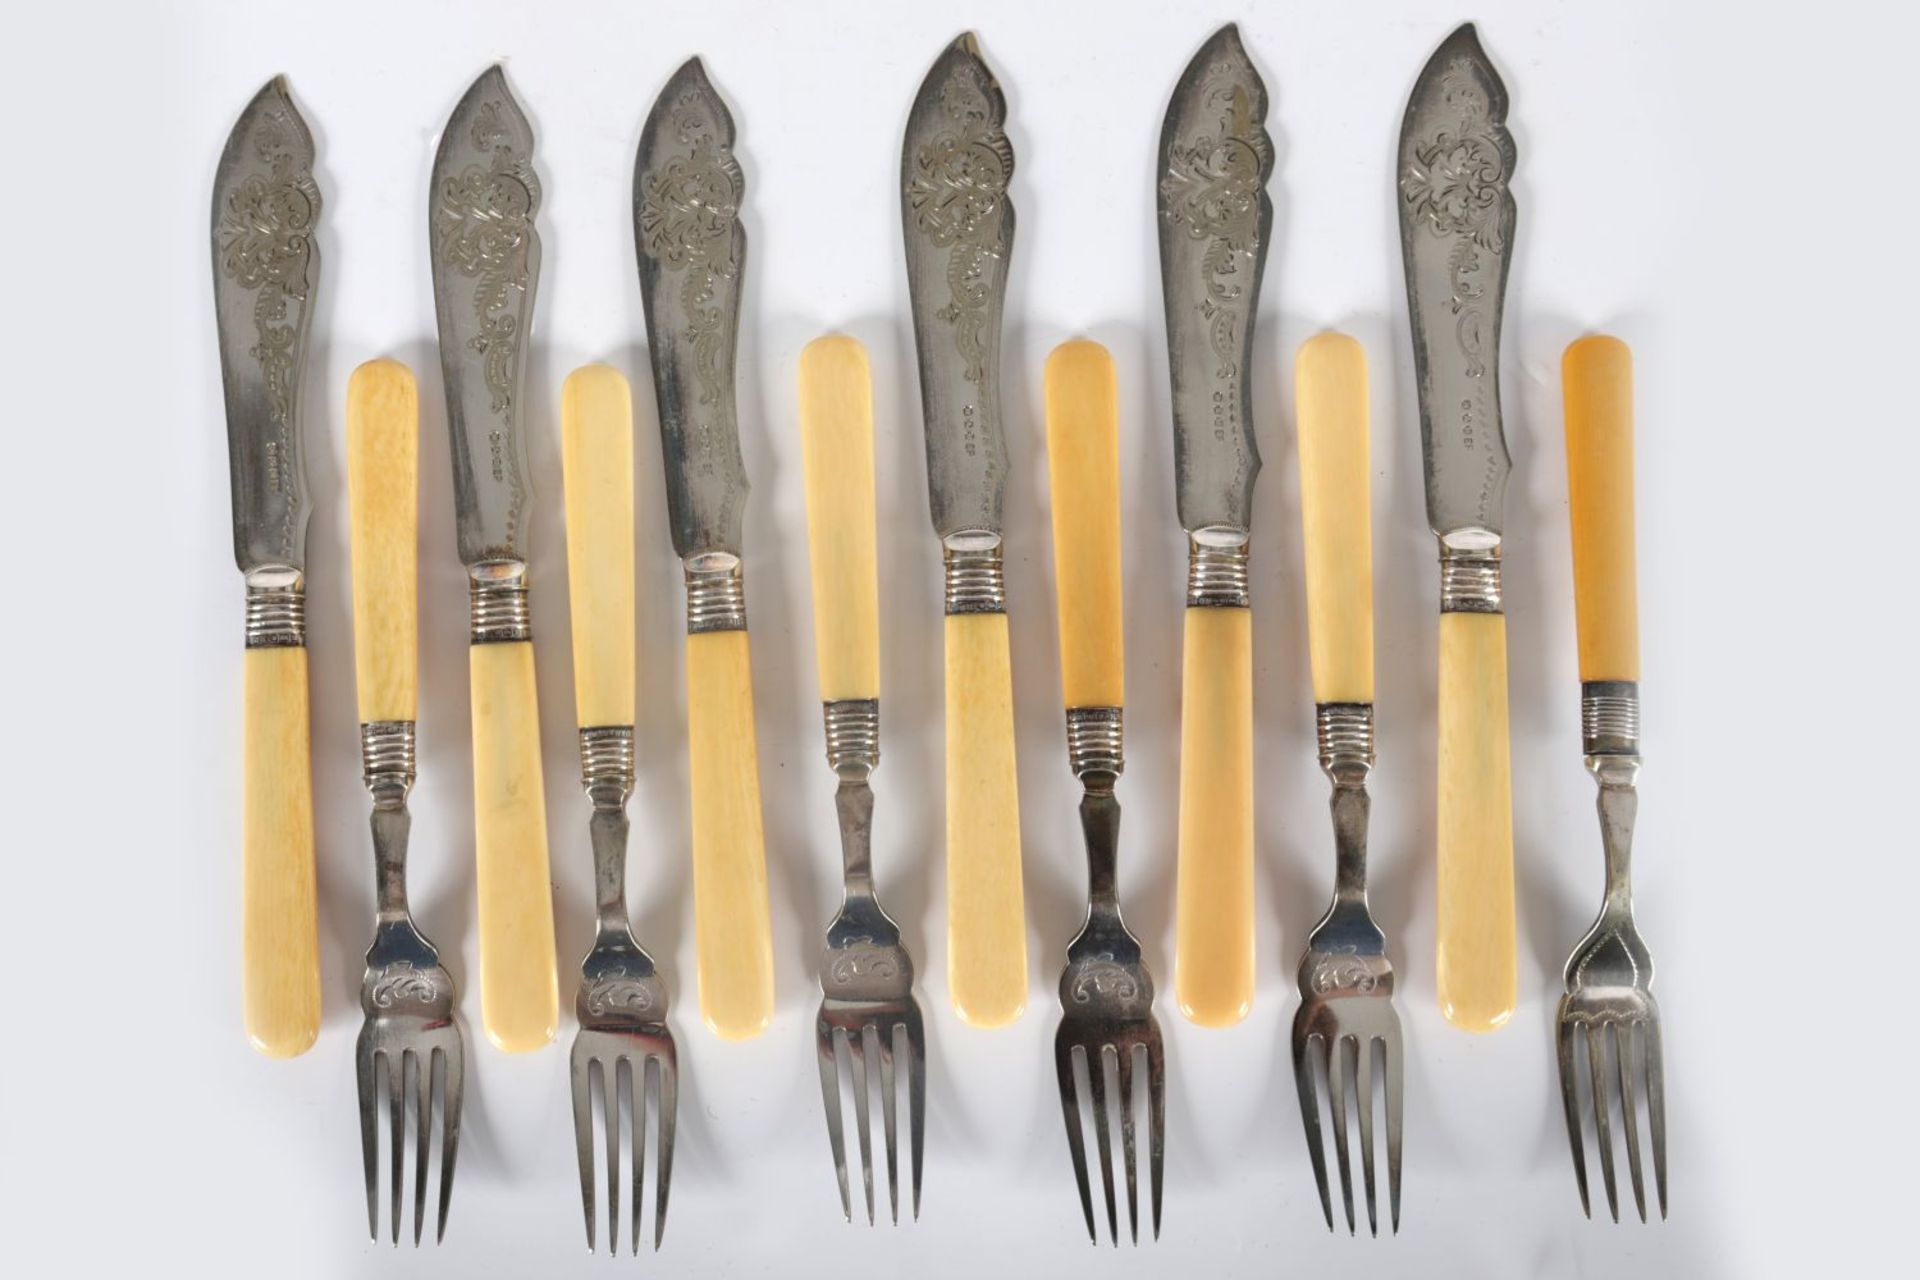 SET OF 6 FISH KNIVES AND FORKS